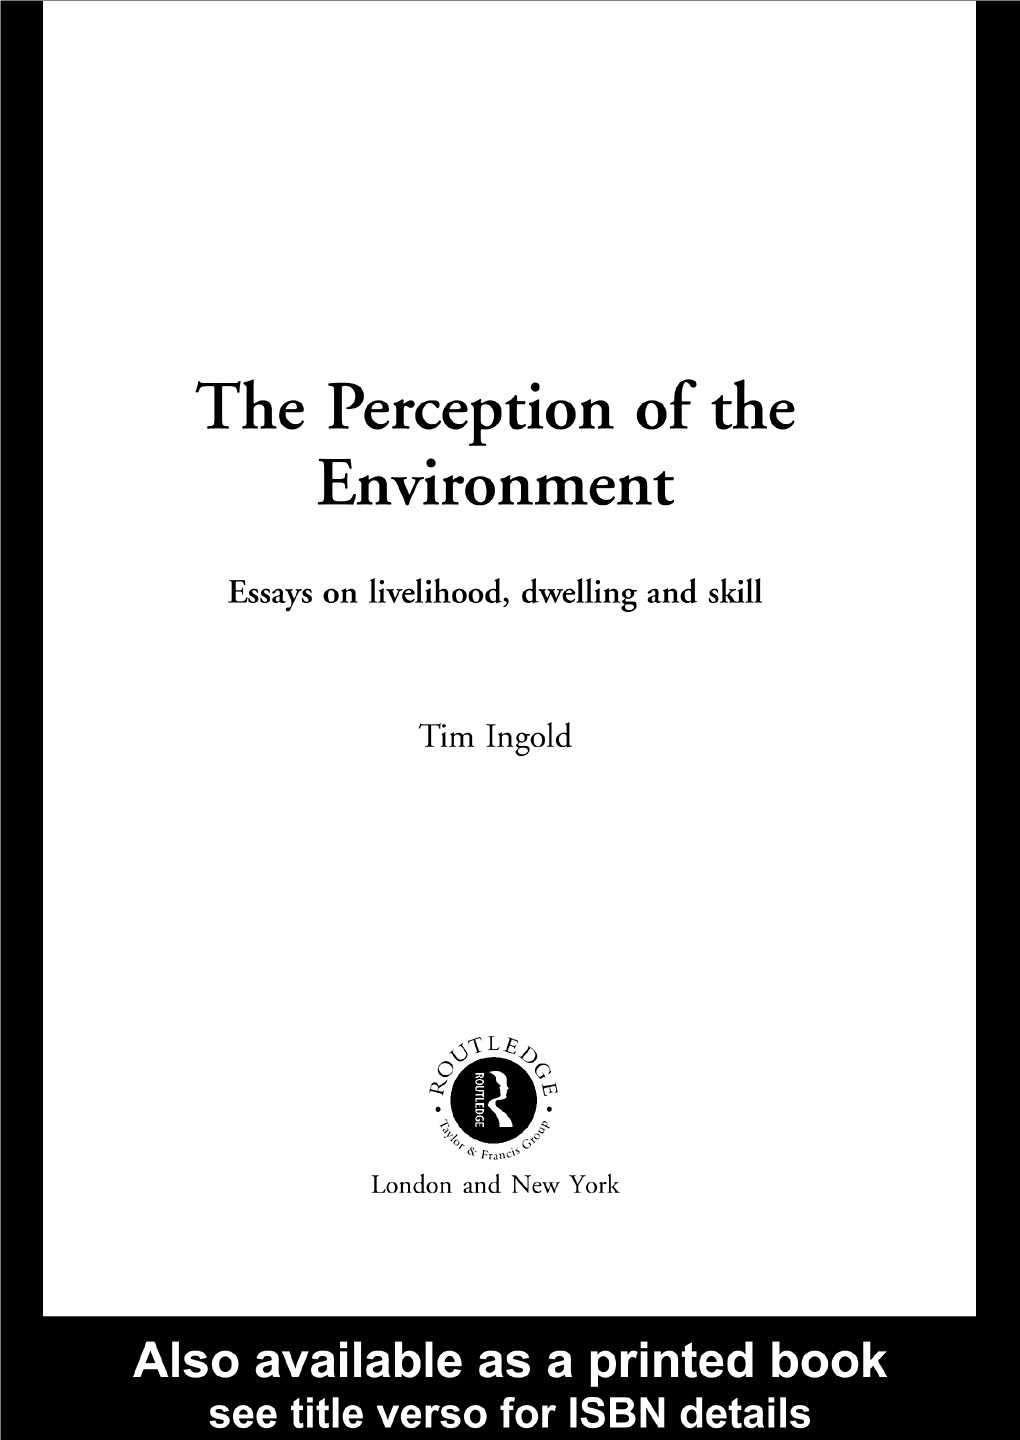 The Perception of the Environment 5 6 7 8 in This Work Tim Ingold Offers a Persuasive New Approach to Understanding How Human 9 Beings Perceive Their Surroundings